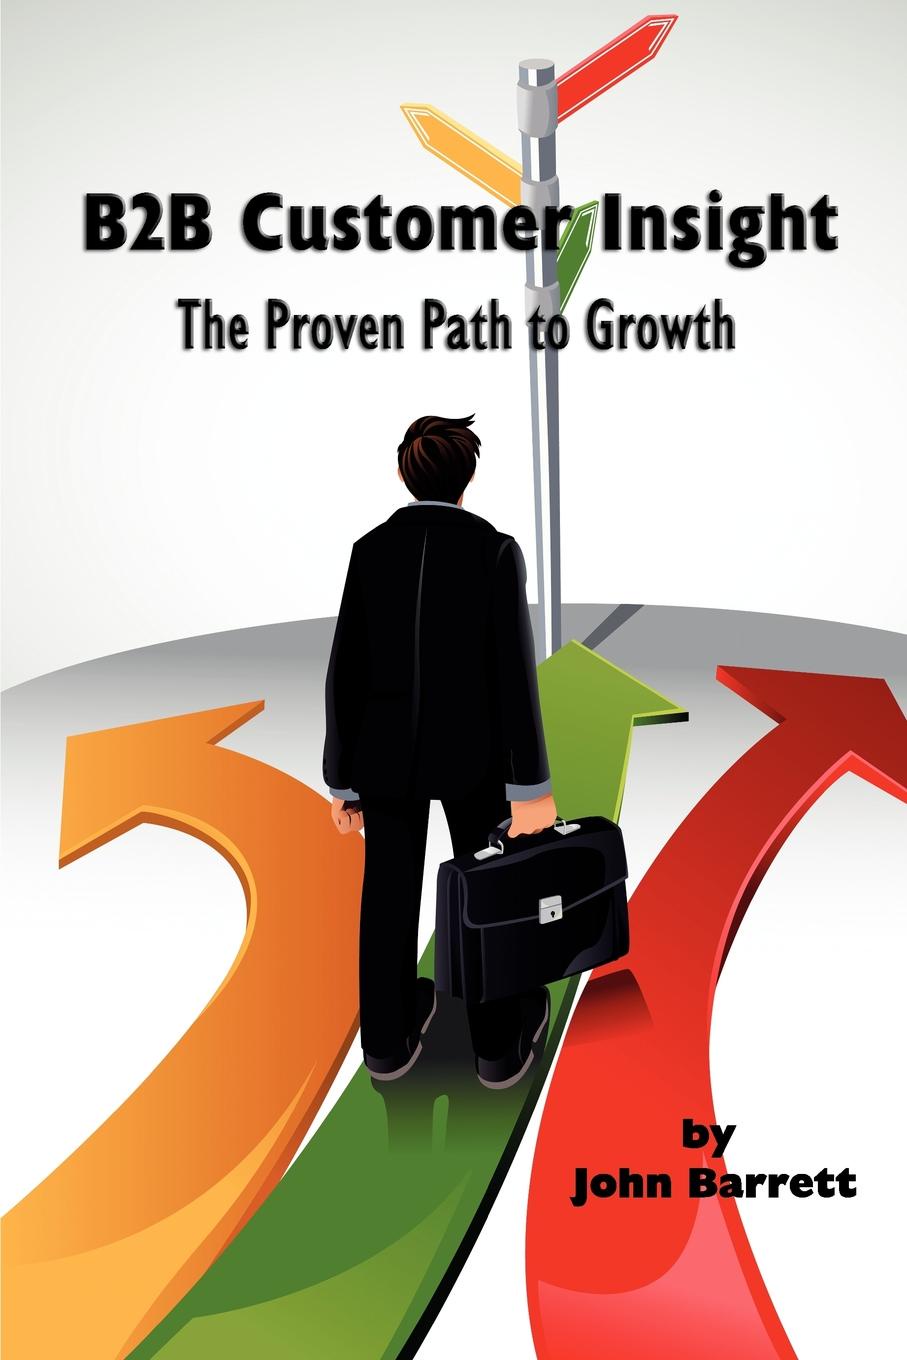 B2B Customer Insight. The Proven Path to Growth